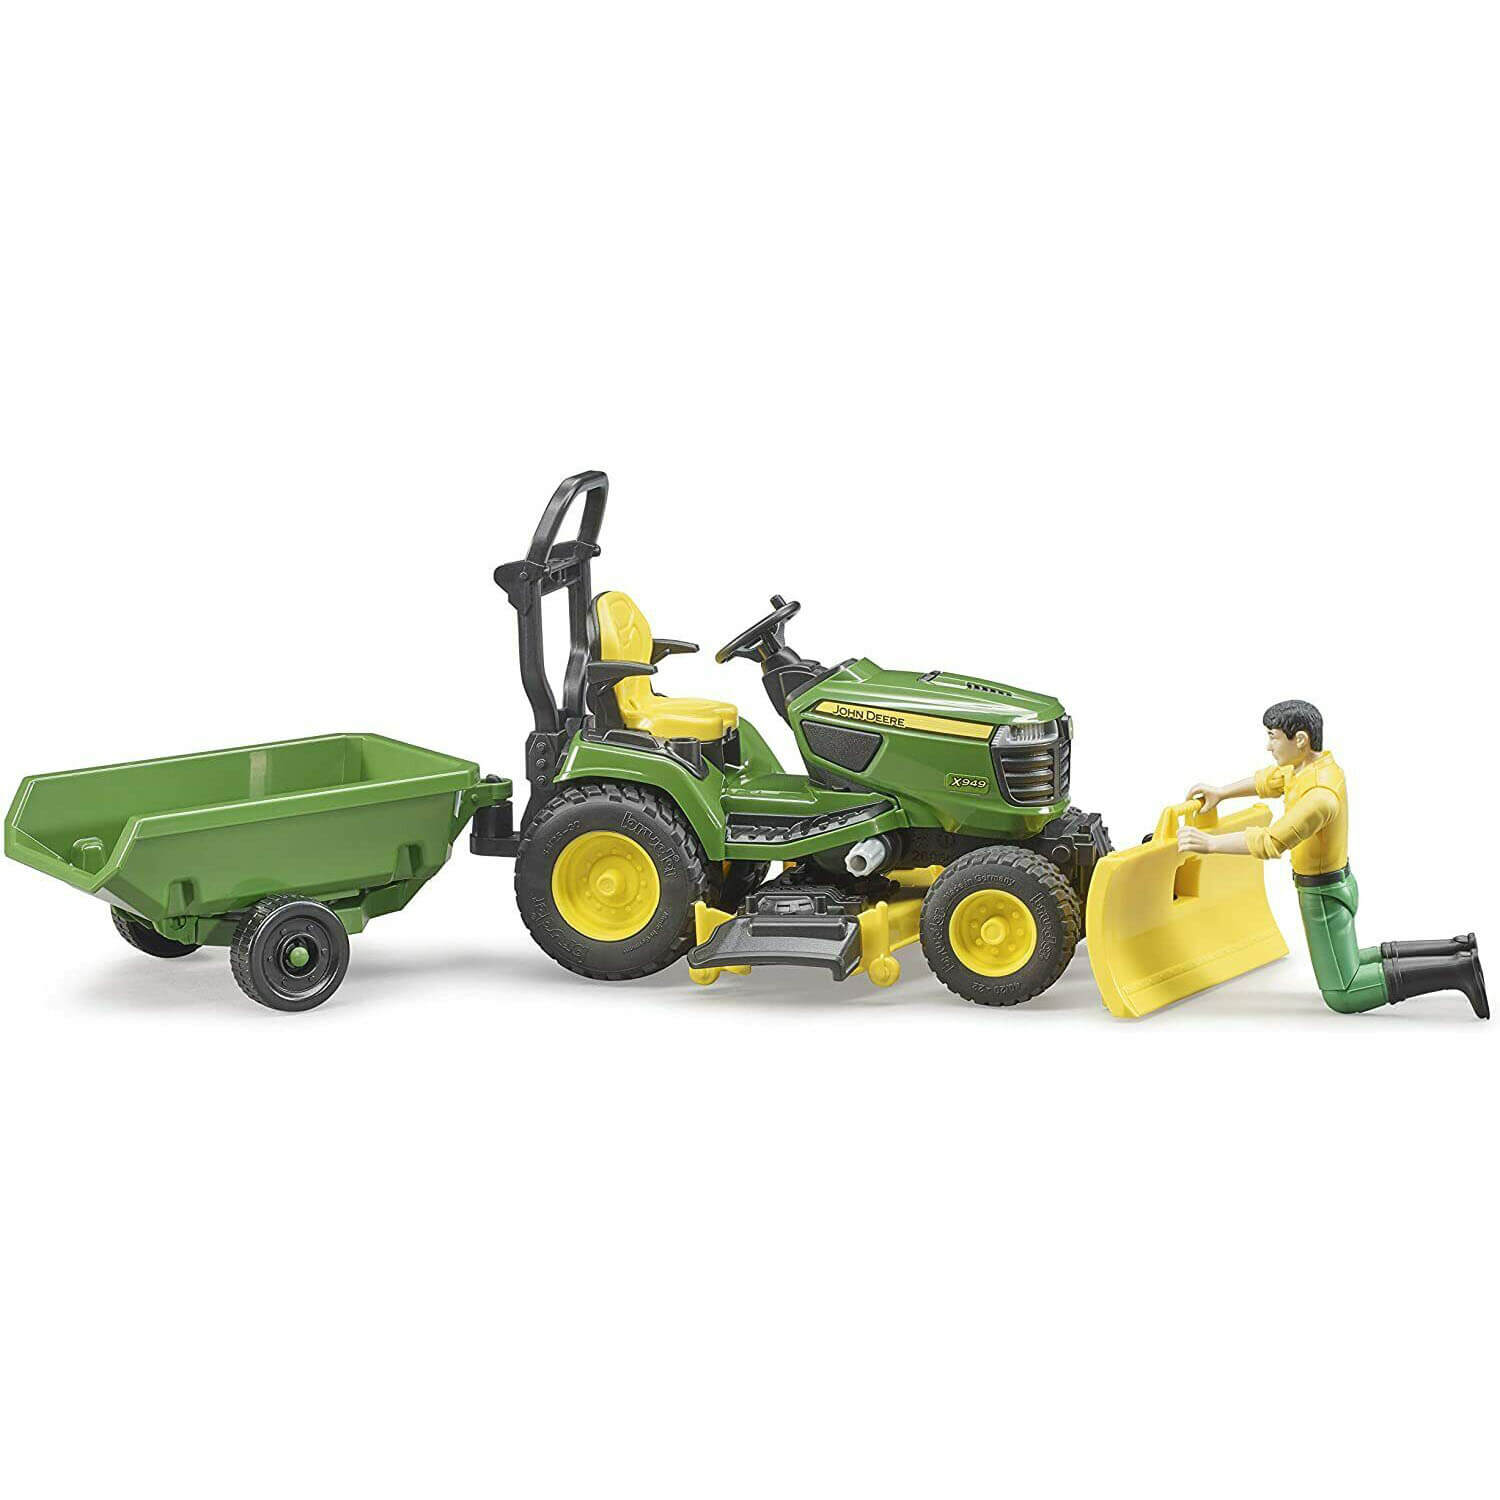 Bruder Pro Series 1:16 Scale John Deere X949 Riding Lawn Mower Tractor with Trailer and Gardener